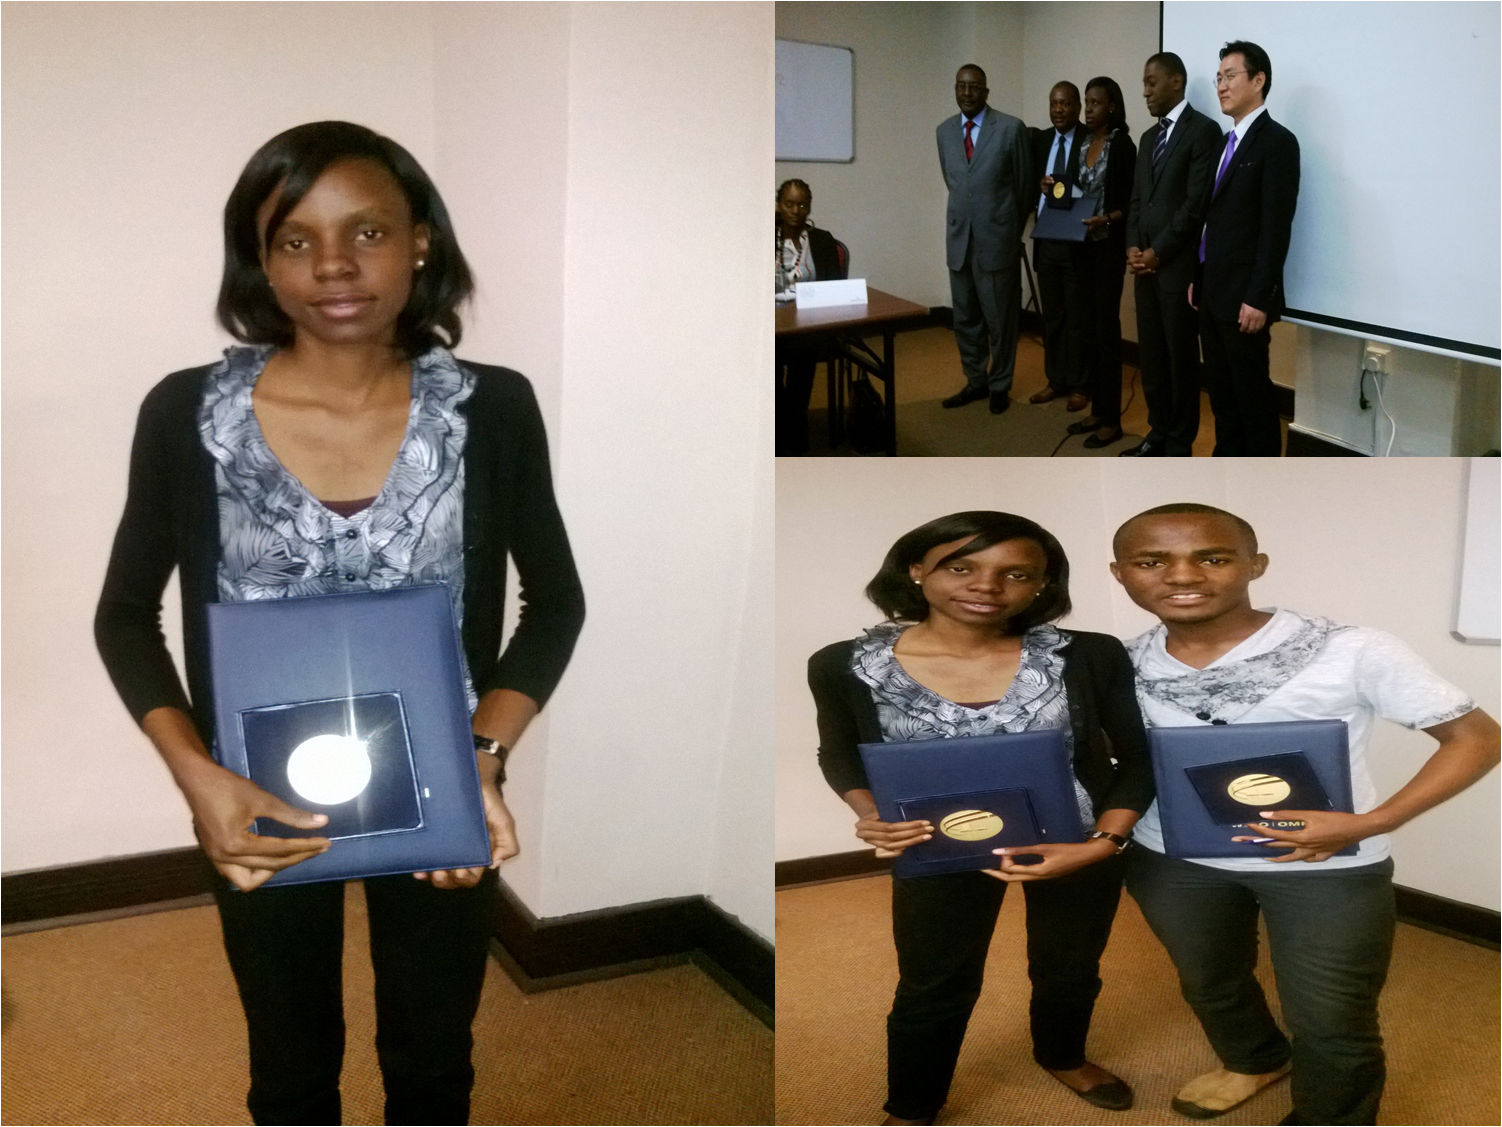 Munsanda Ngulube and Daniel Phiri got first and second awards repectively